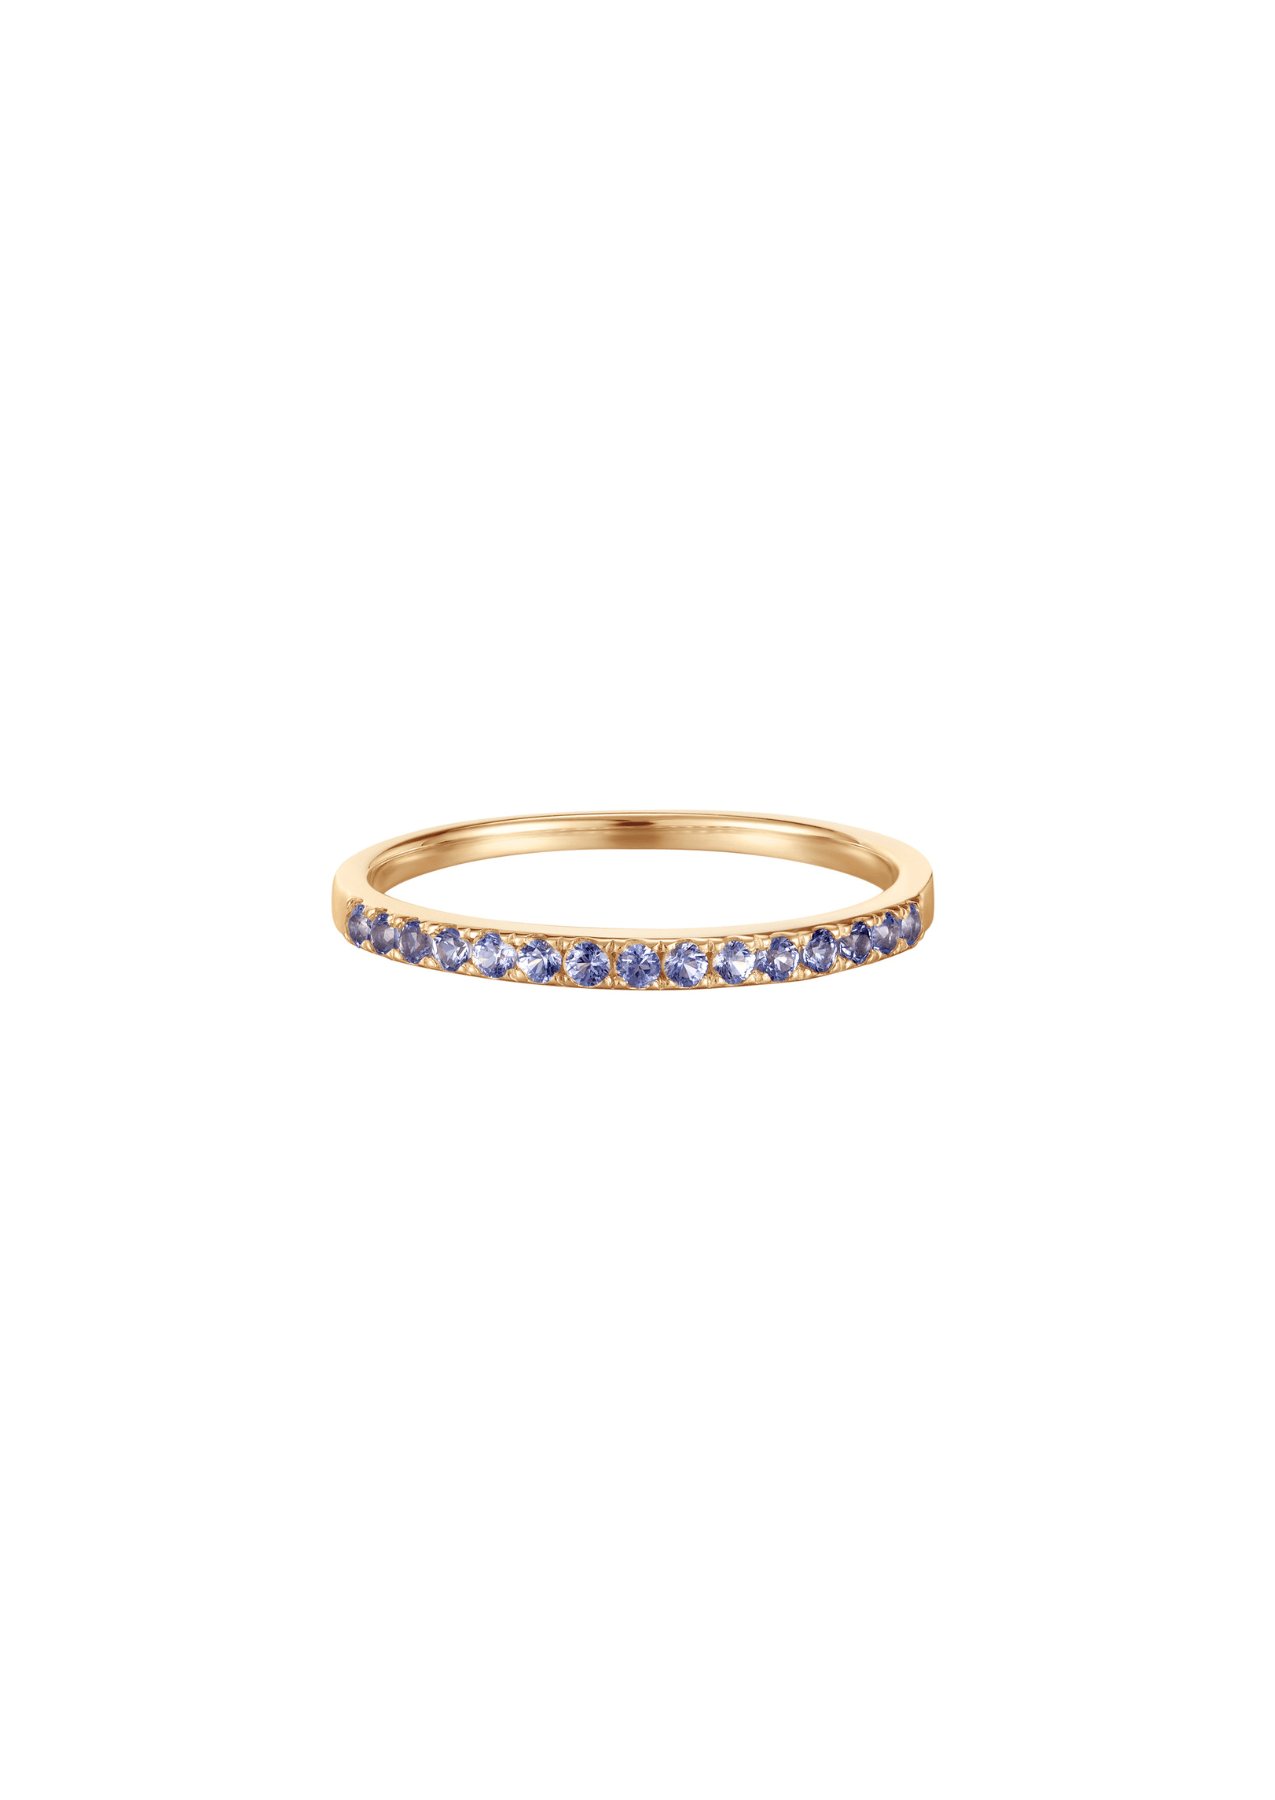 The Midnight Tanzanite 14ct Solid Gold Ring - Molten Store